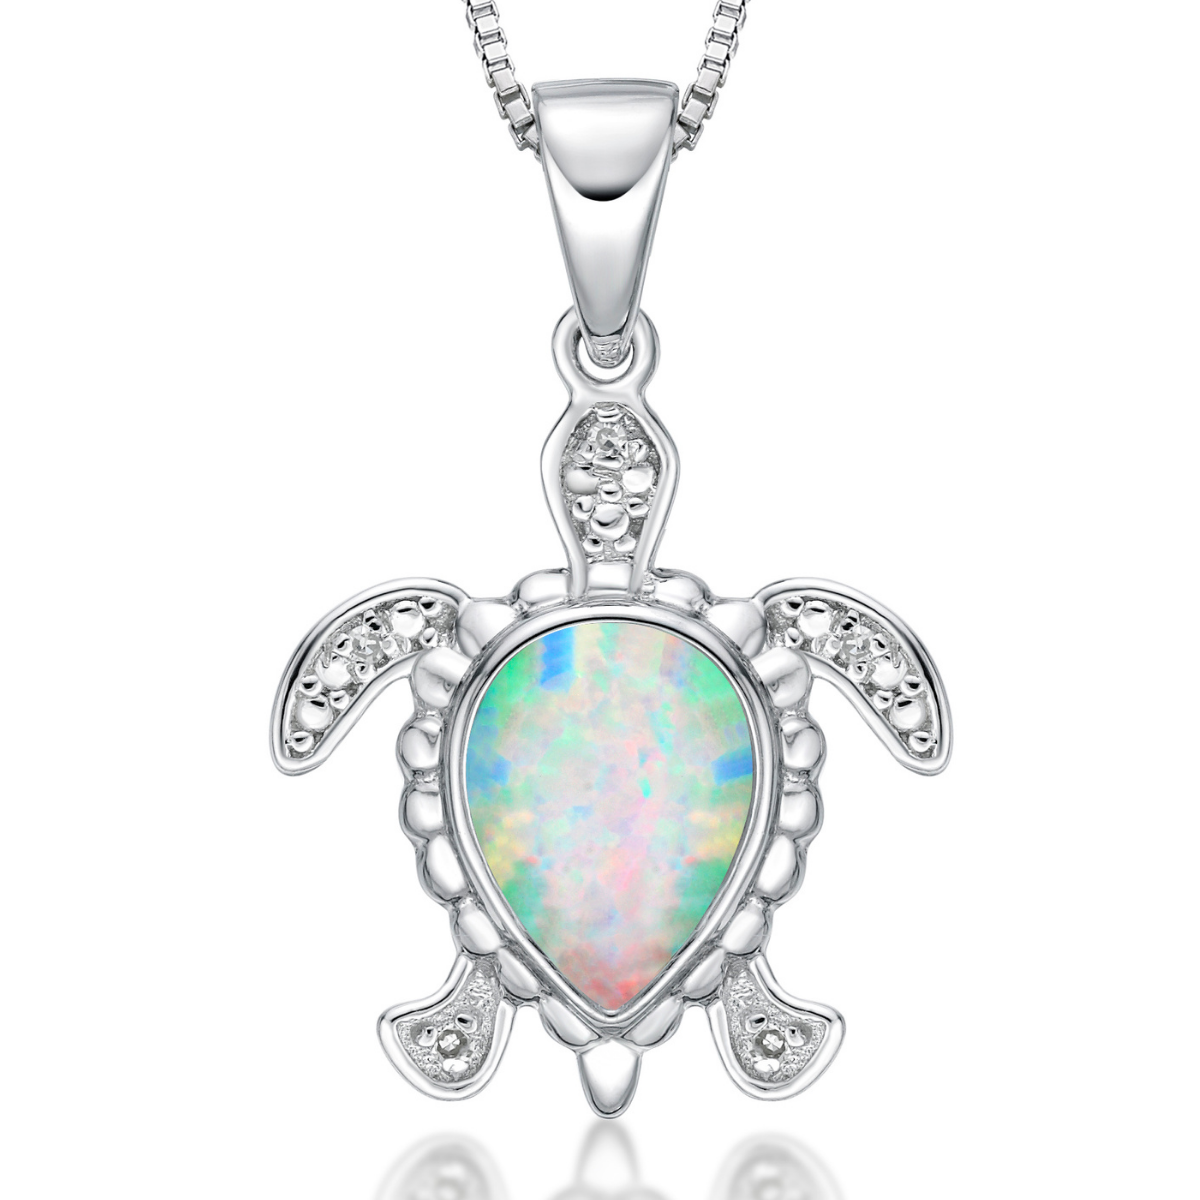 Women's Created White Opal Turtle Diamond Pendant with Lobster Clasp, Sterling Silver, .015 Cttw, 18 Inch Cable Chain | Lavari Jewelers